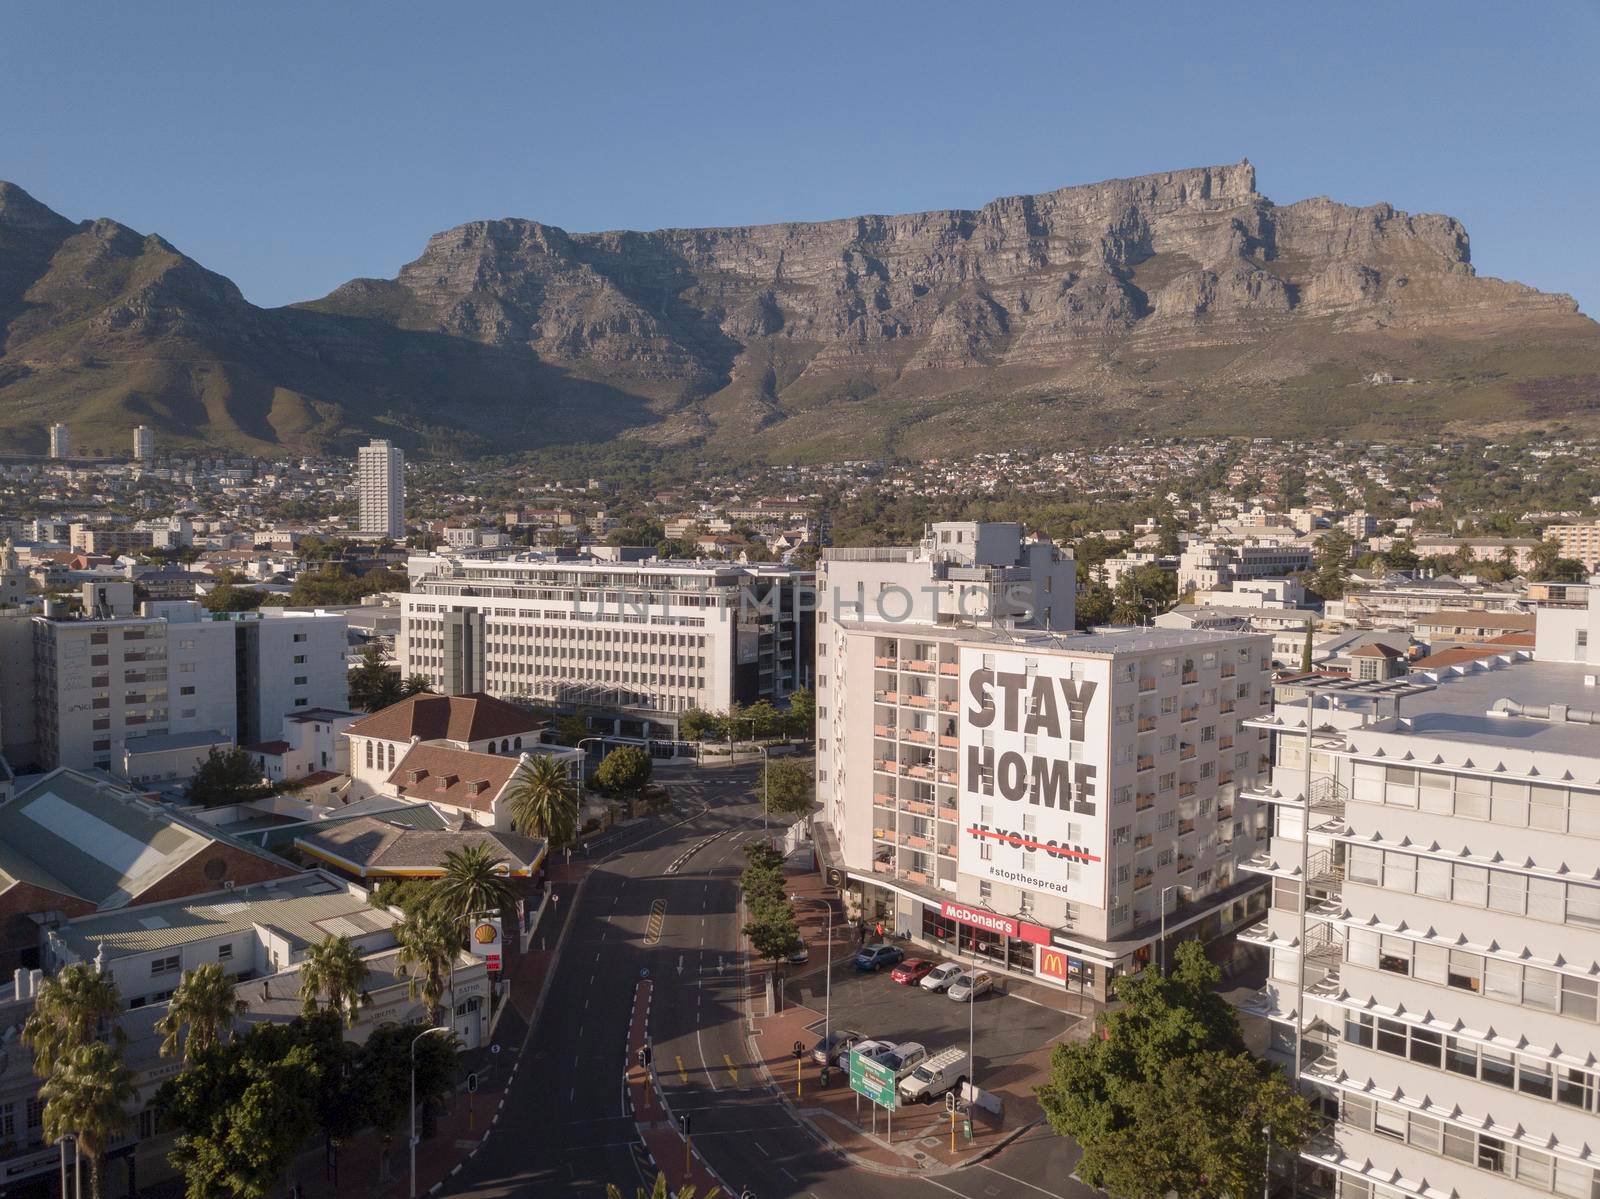 2 April 2020 - Cape Town, South Africa: Aerial view of empty streets in Cape Town, South Africa during the Covid 19 lockdown.